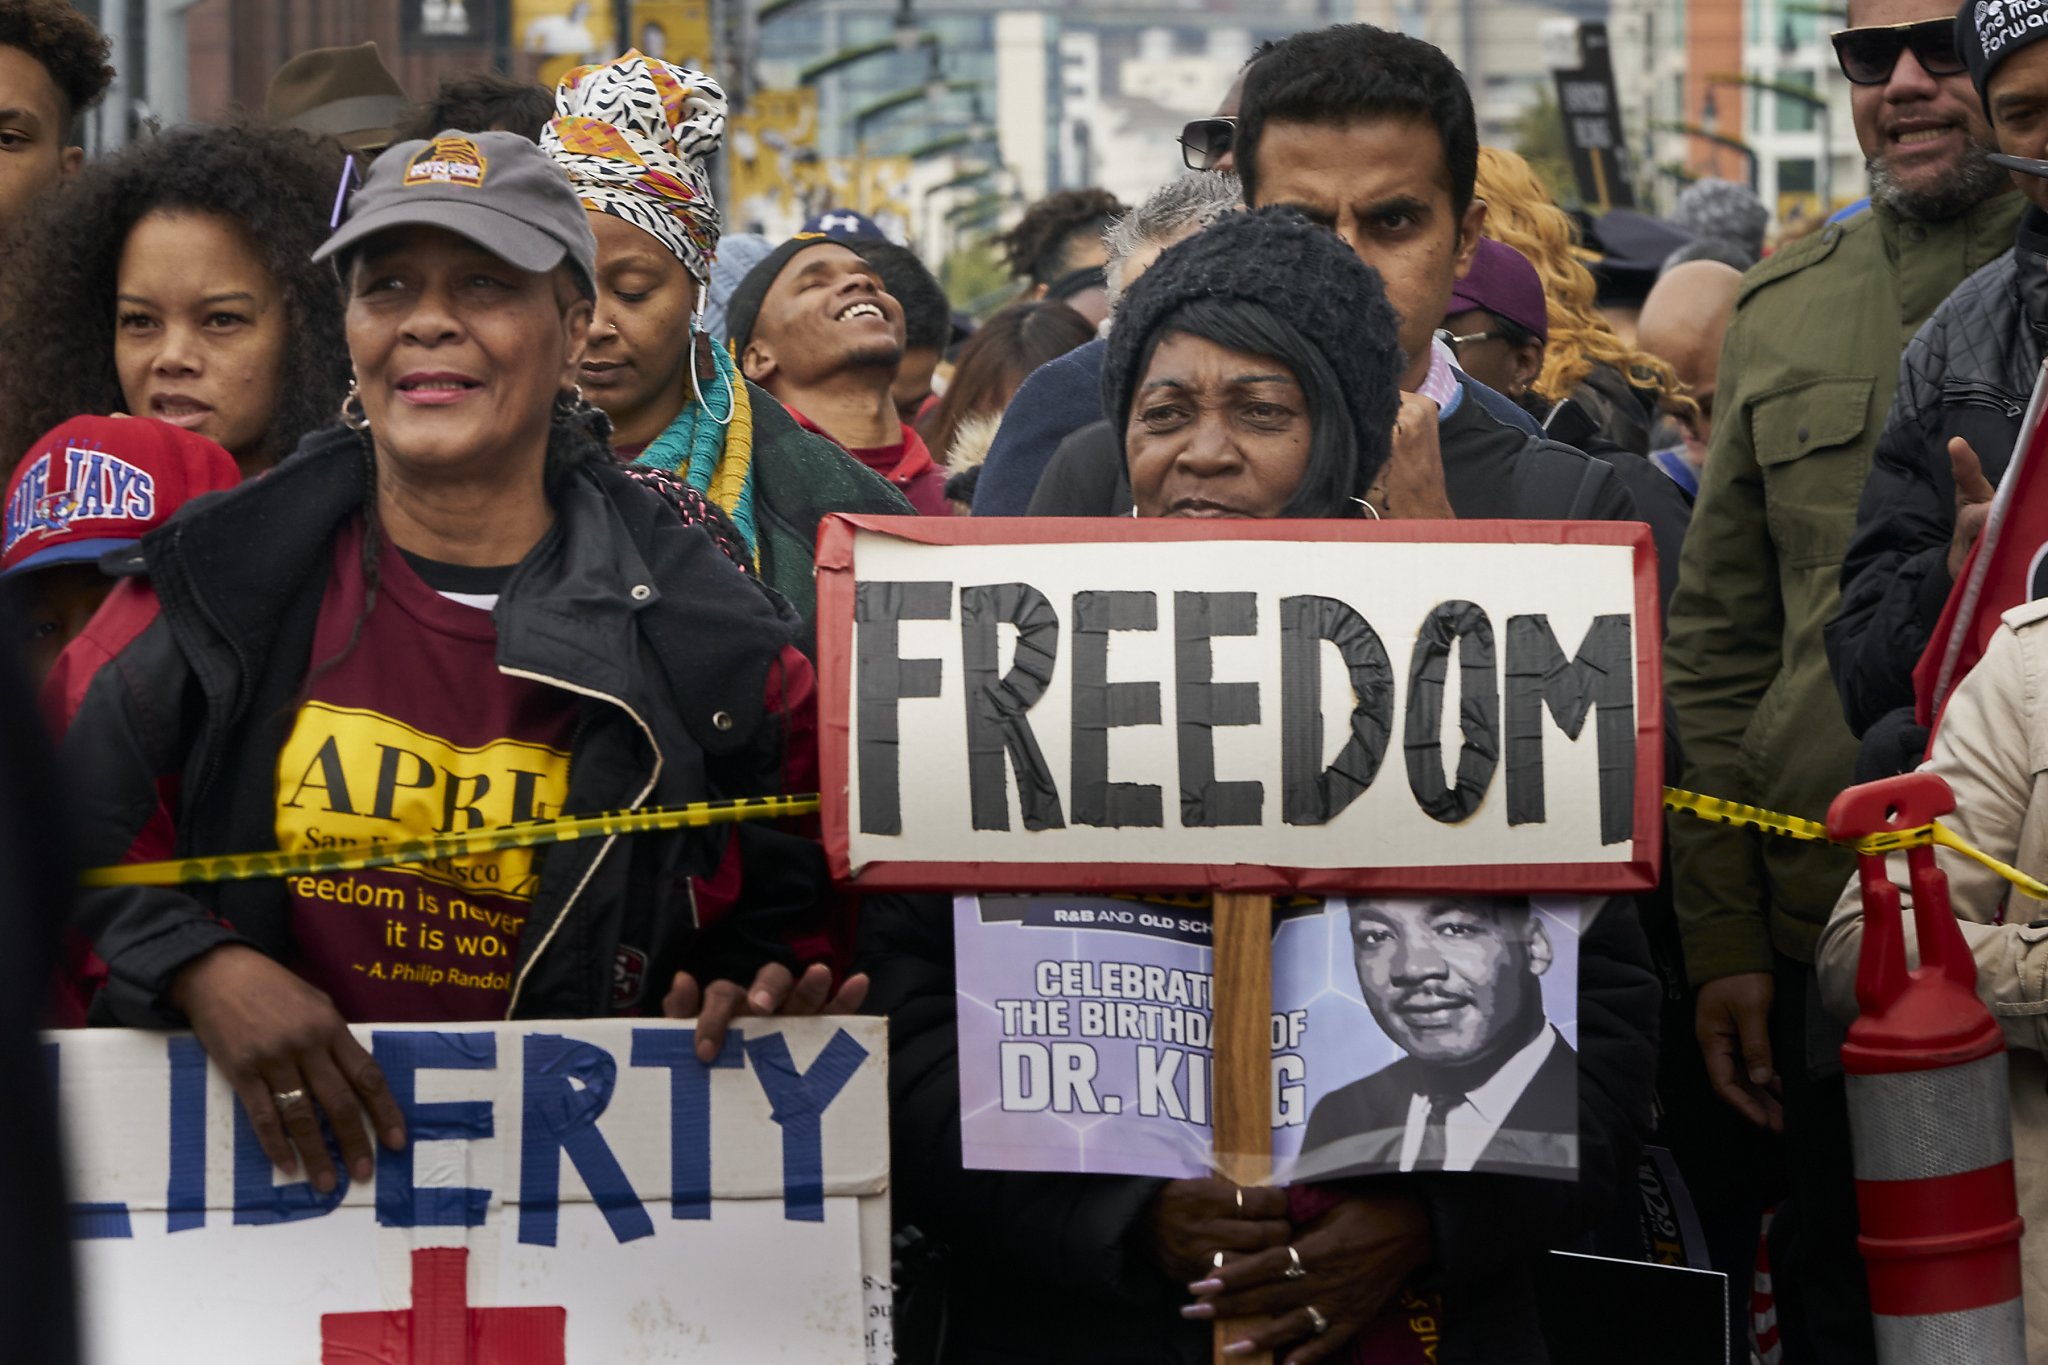 Annual MLK Day march in San Francisco brings out festive, determined crowd